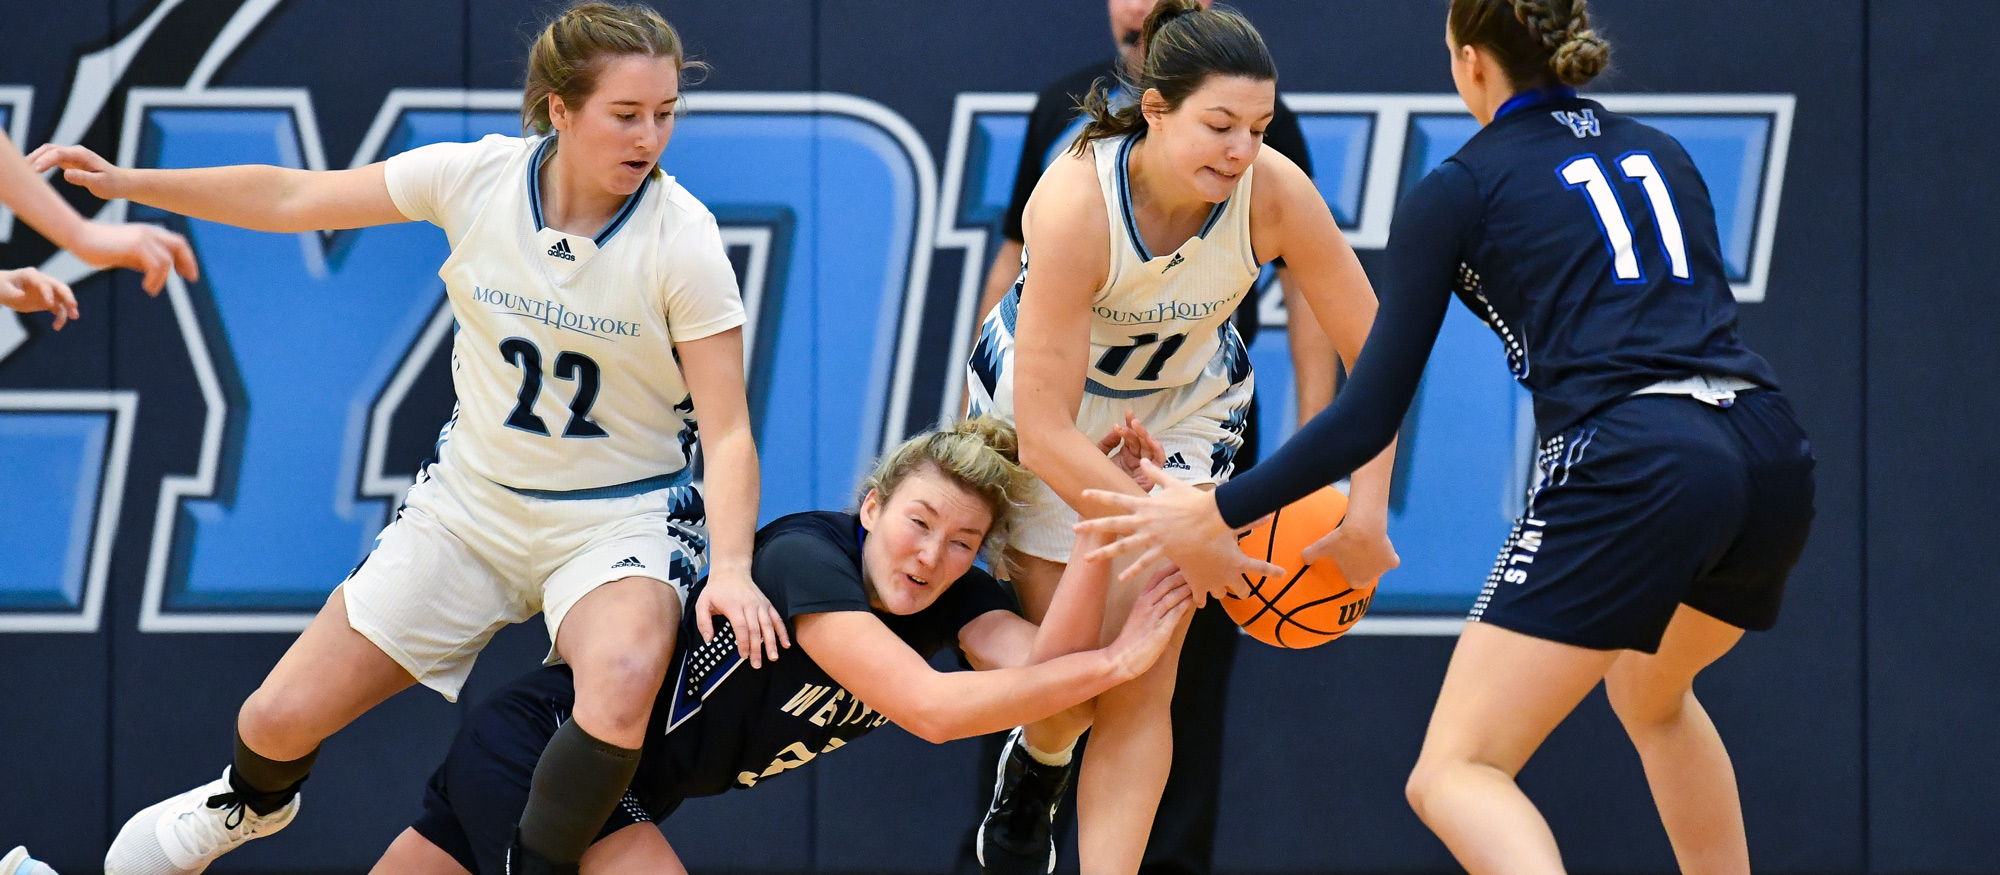 Kendall Maurer (left) and Isabel Cordes (right) combined for 11 points and 13 rebounds in Mount Holyoke's loss at Coast Guard on Feb. 1, 2023. (RJB Sports file photo)